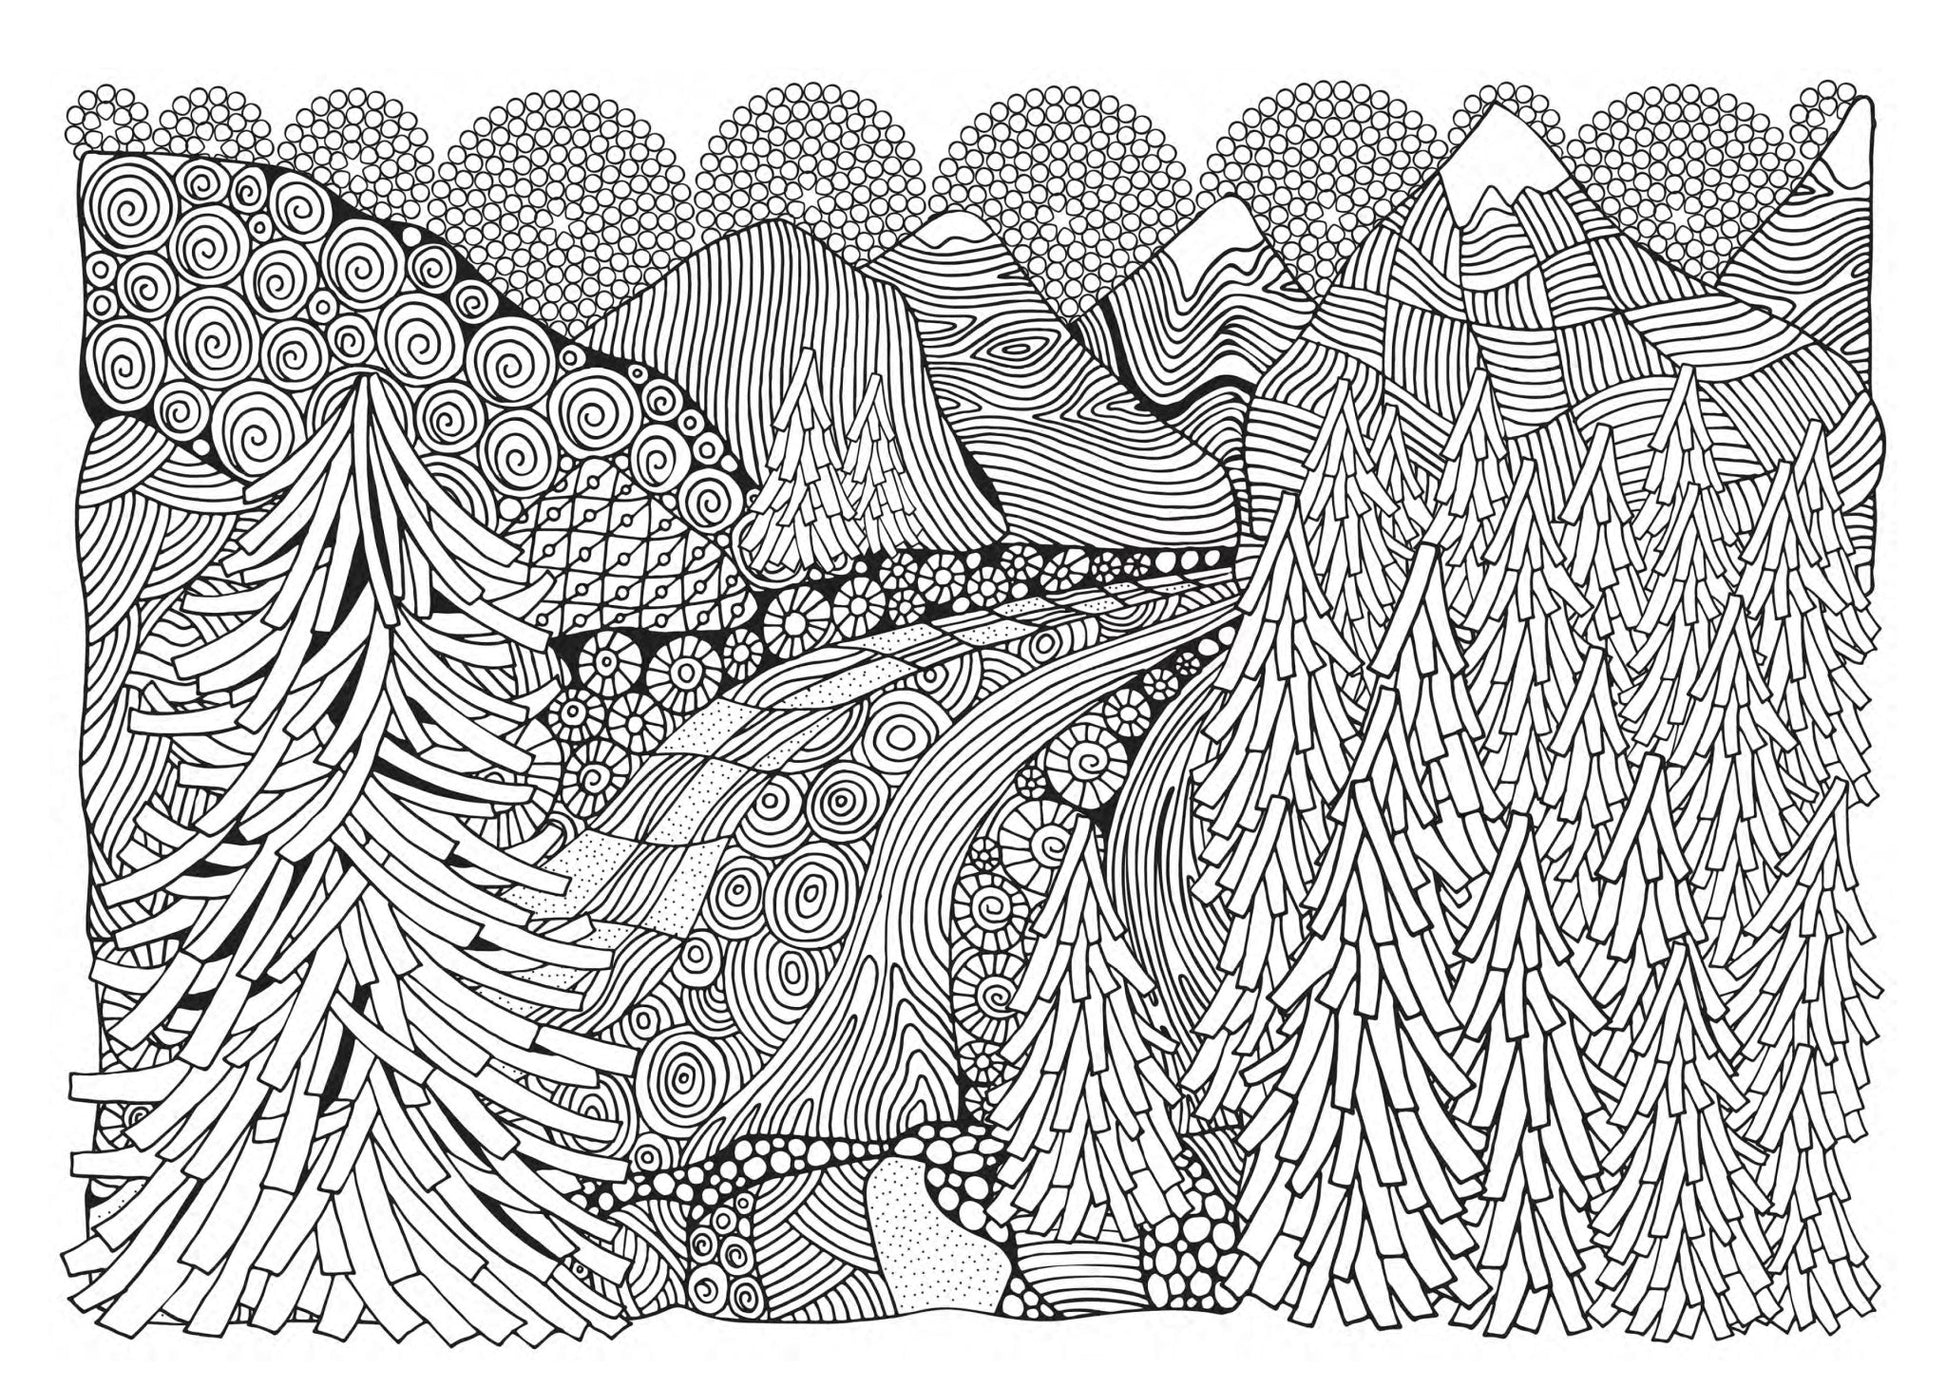 Landscapes Coloring Book Zentangle (Printbook) - Monsoon Publishing USA